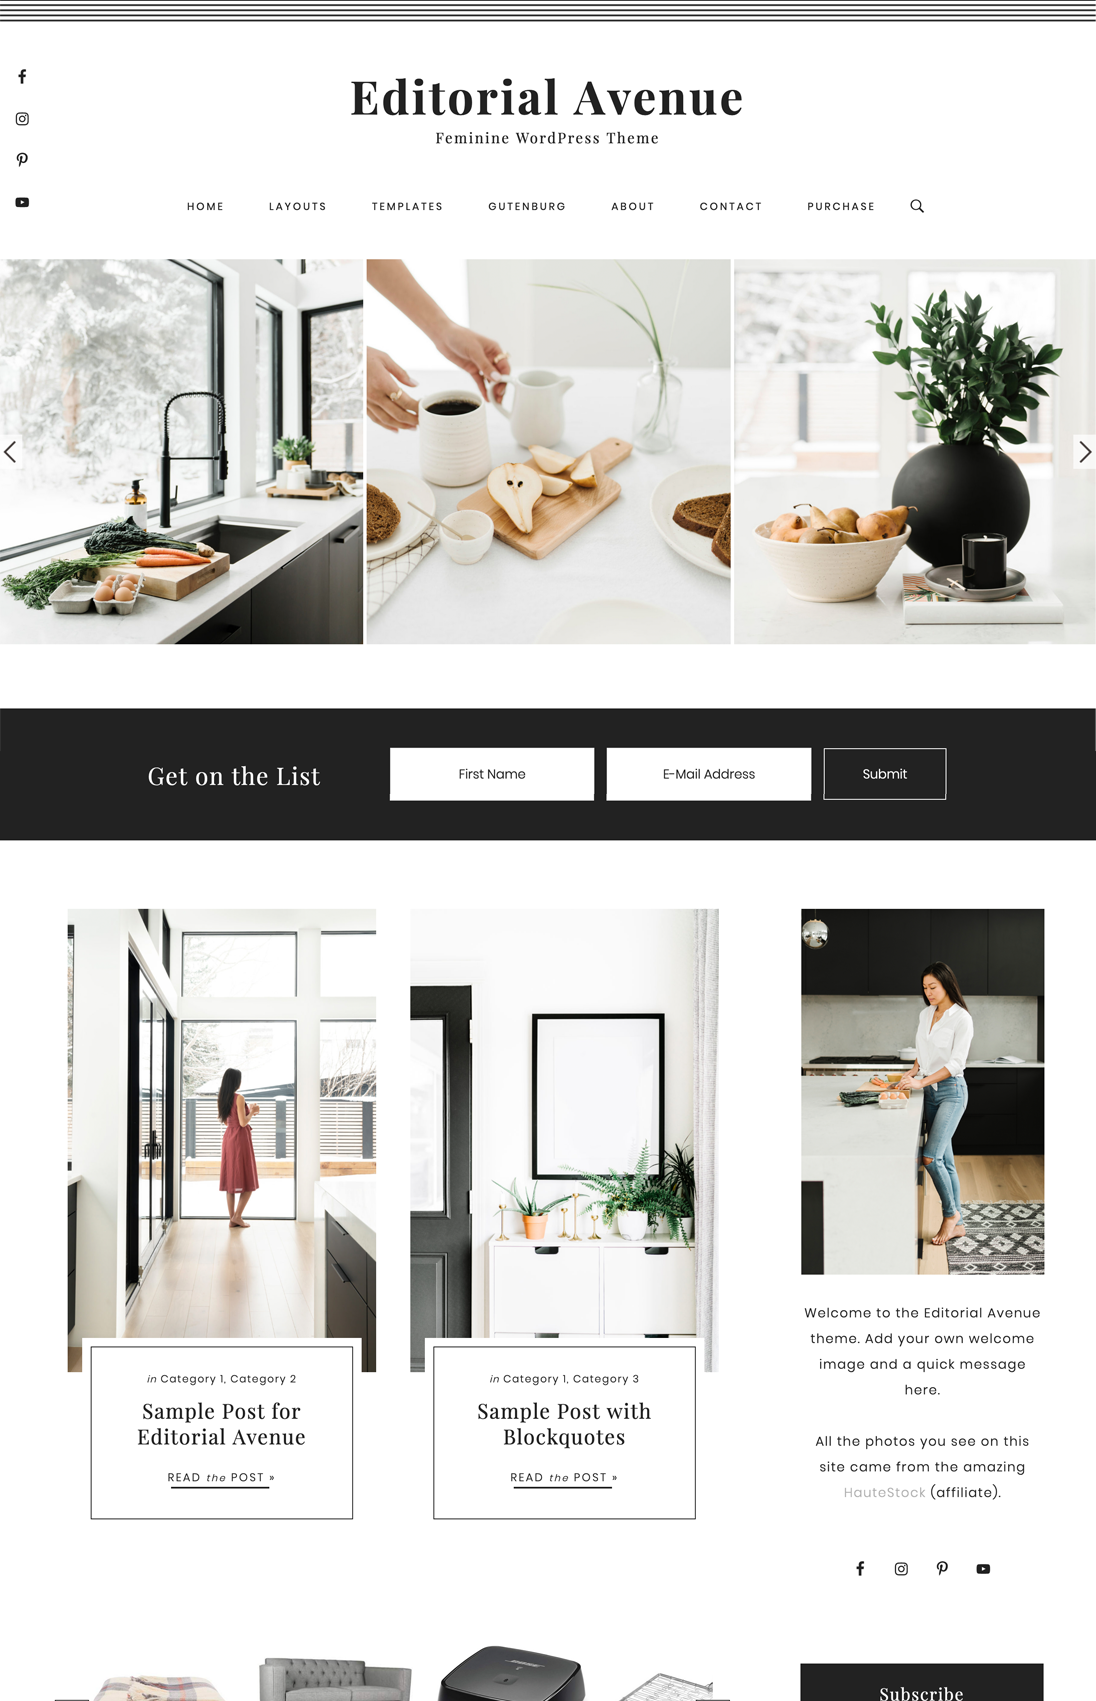 A simple but elegant WordPress Theme for bloggers. This is a black and white WordPress blog theme design that your visitors will love.